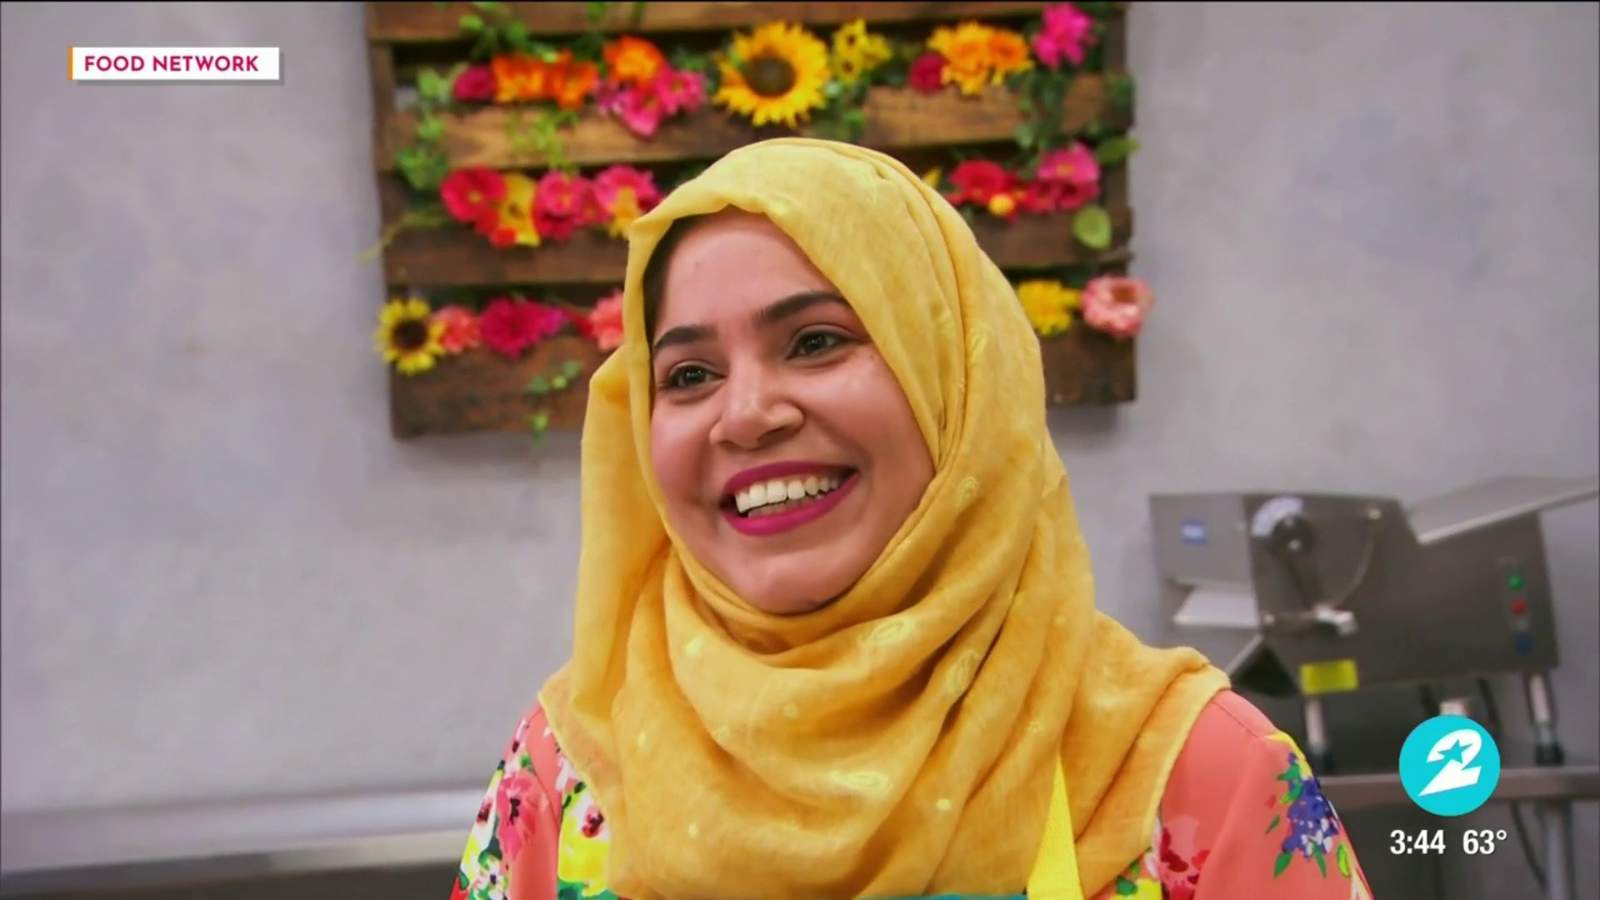 Richmond home baker shows off her skills on Food Network’s ‘Spring Baking Championship’